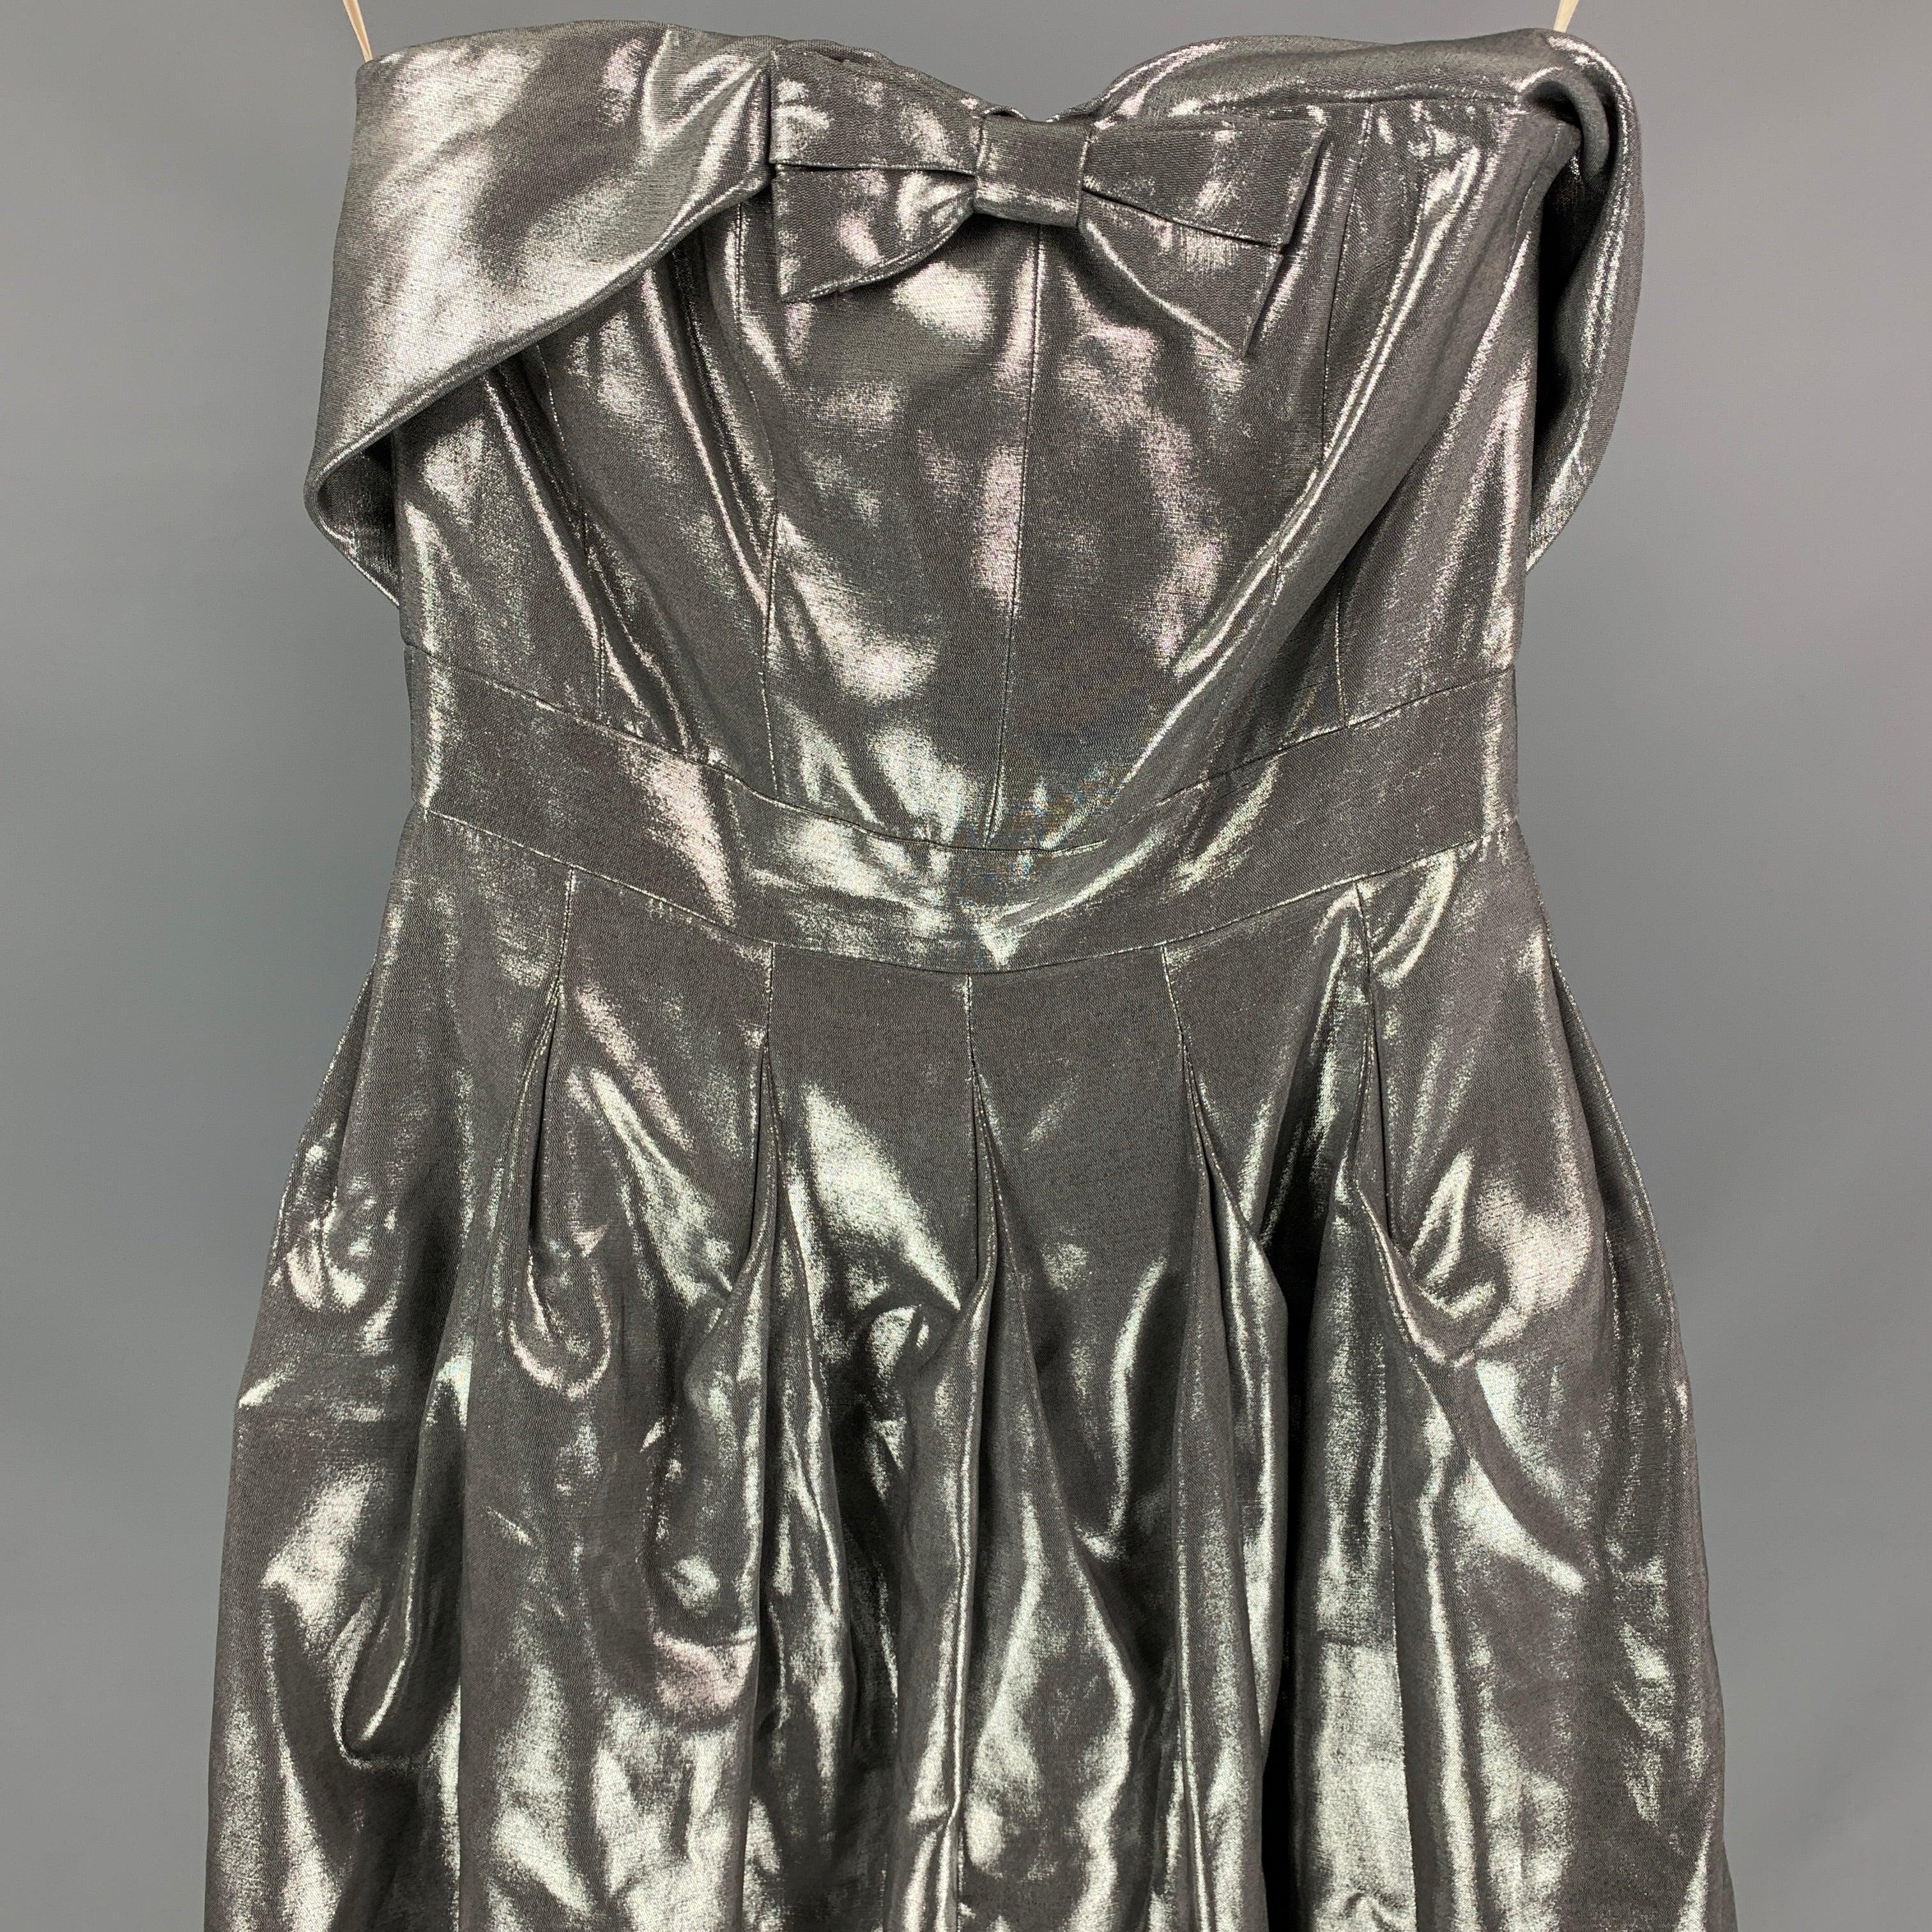 KAREN MILLEN dress comes in a silver metallic viscose blend featuring a pleated style, strapless, front bow detail, a-line, anda back zipper closure.
Very Good
Pre-Owned Condition. 

Marked:   UK 8 / US 4 / EU 36 

Measurements: 
  Bust: 26 inches 